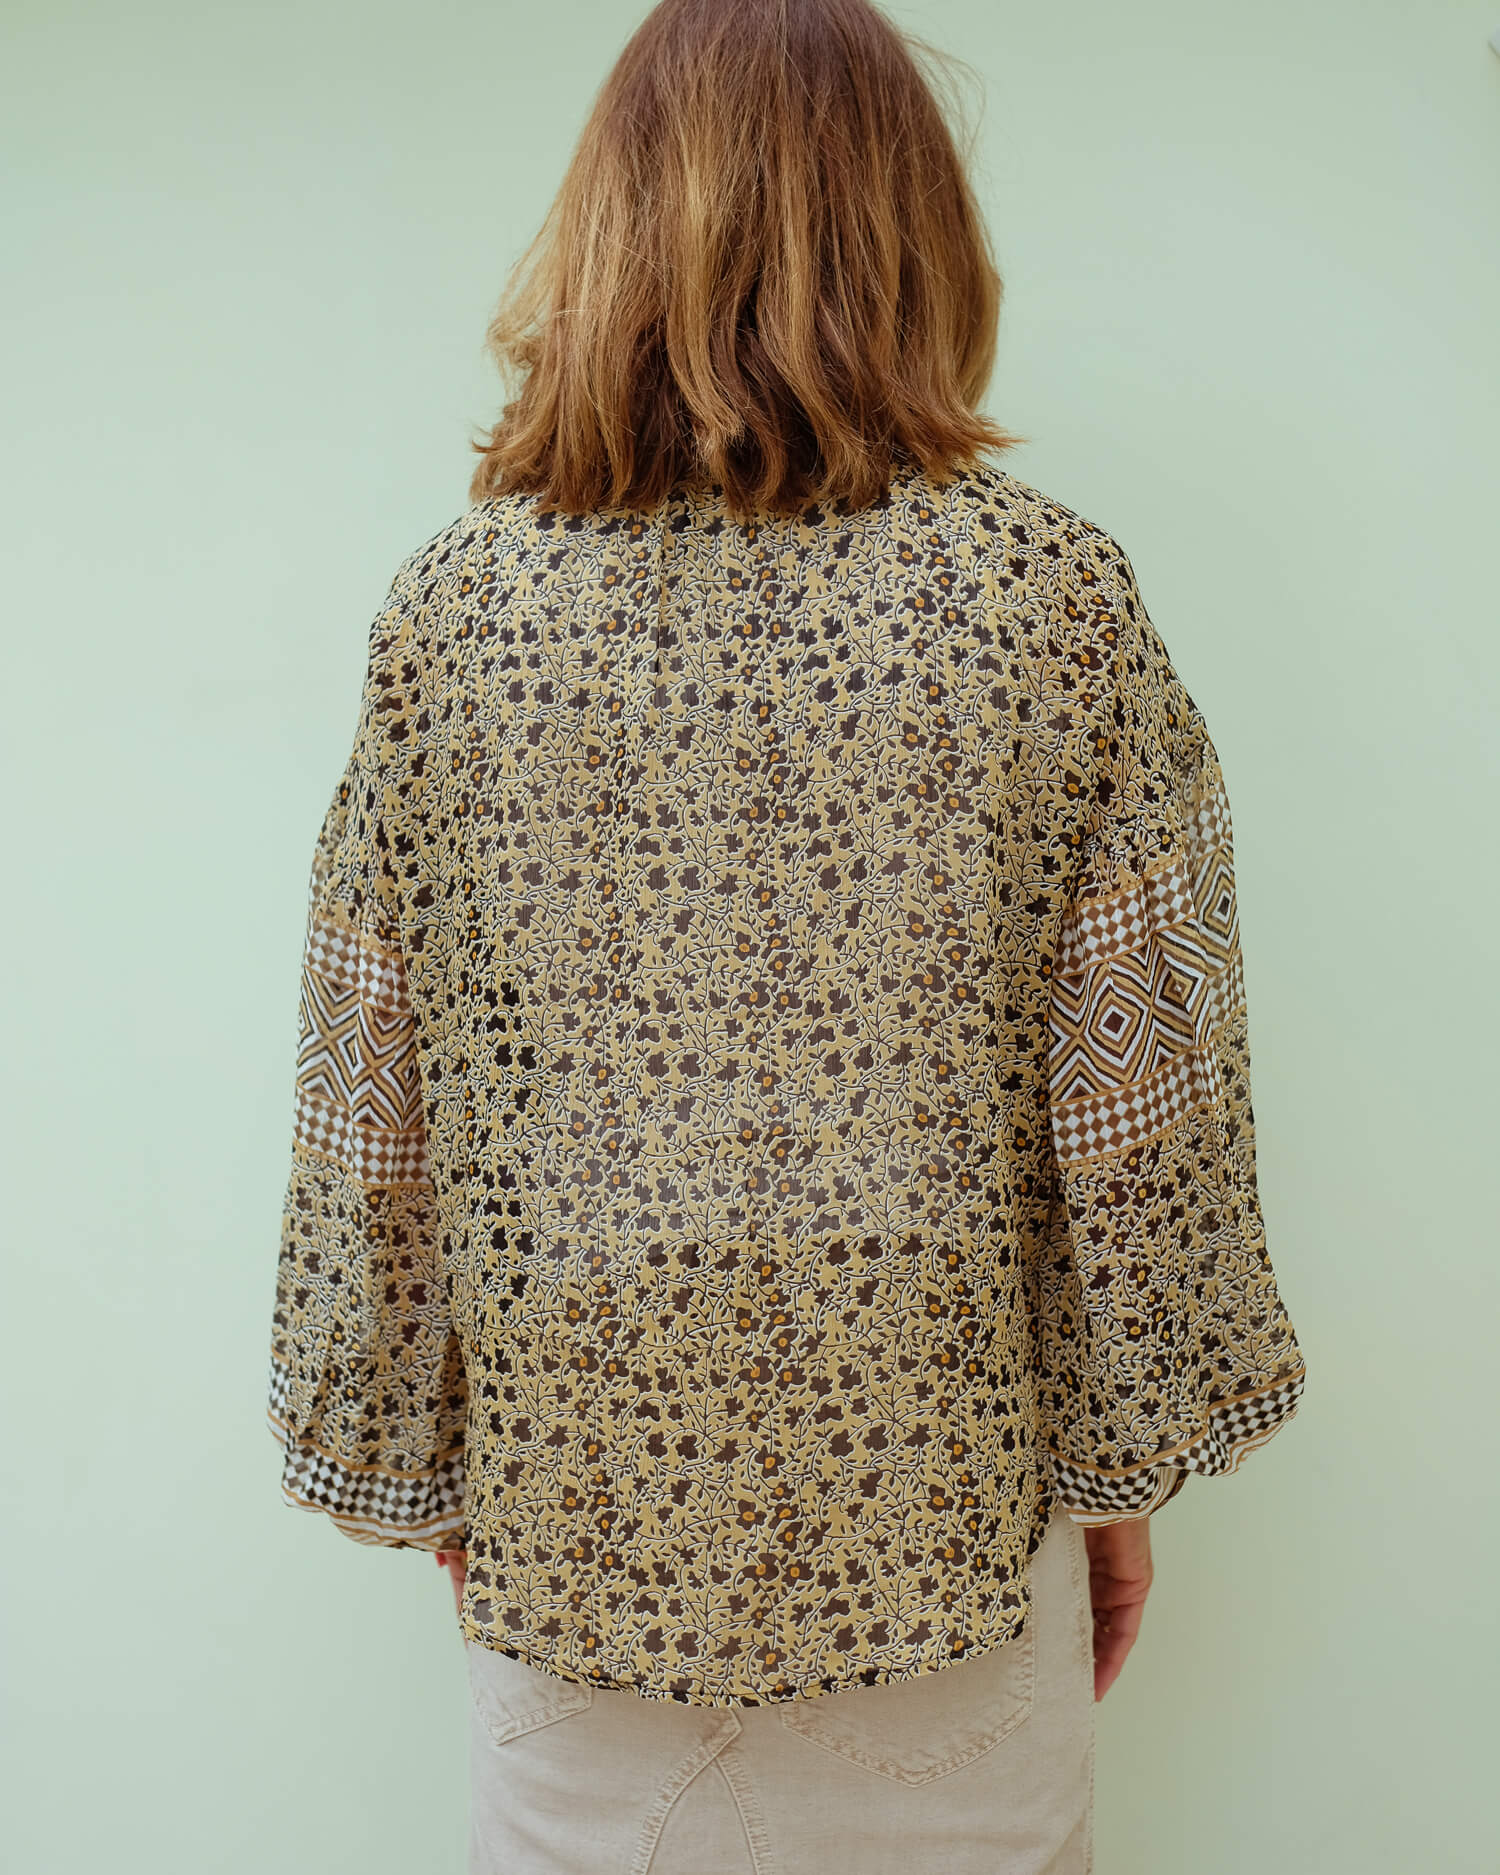 M Mission blouse in sienna